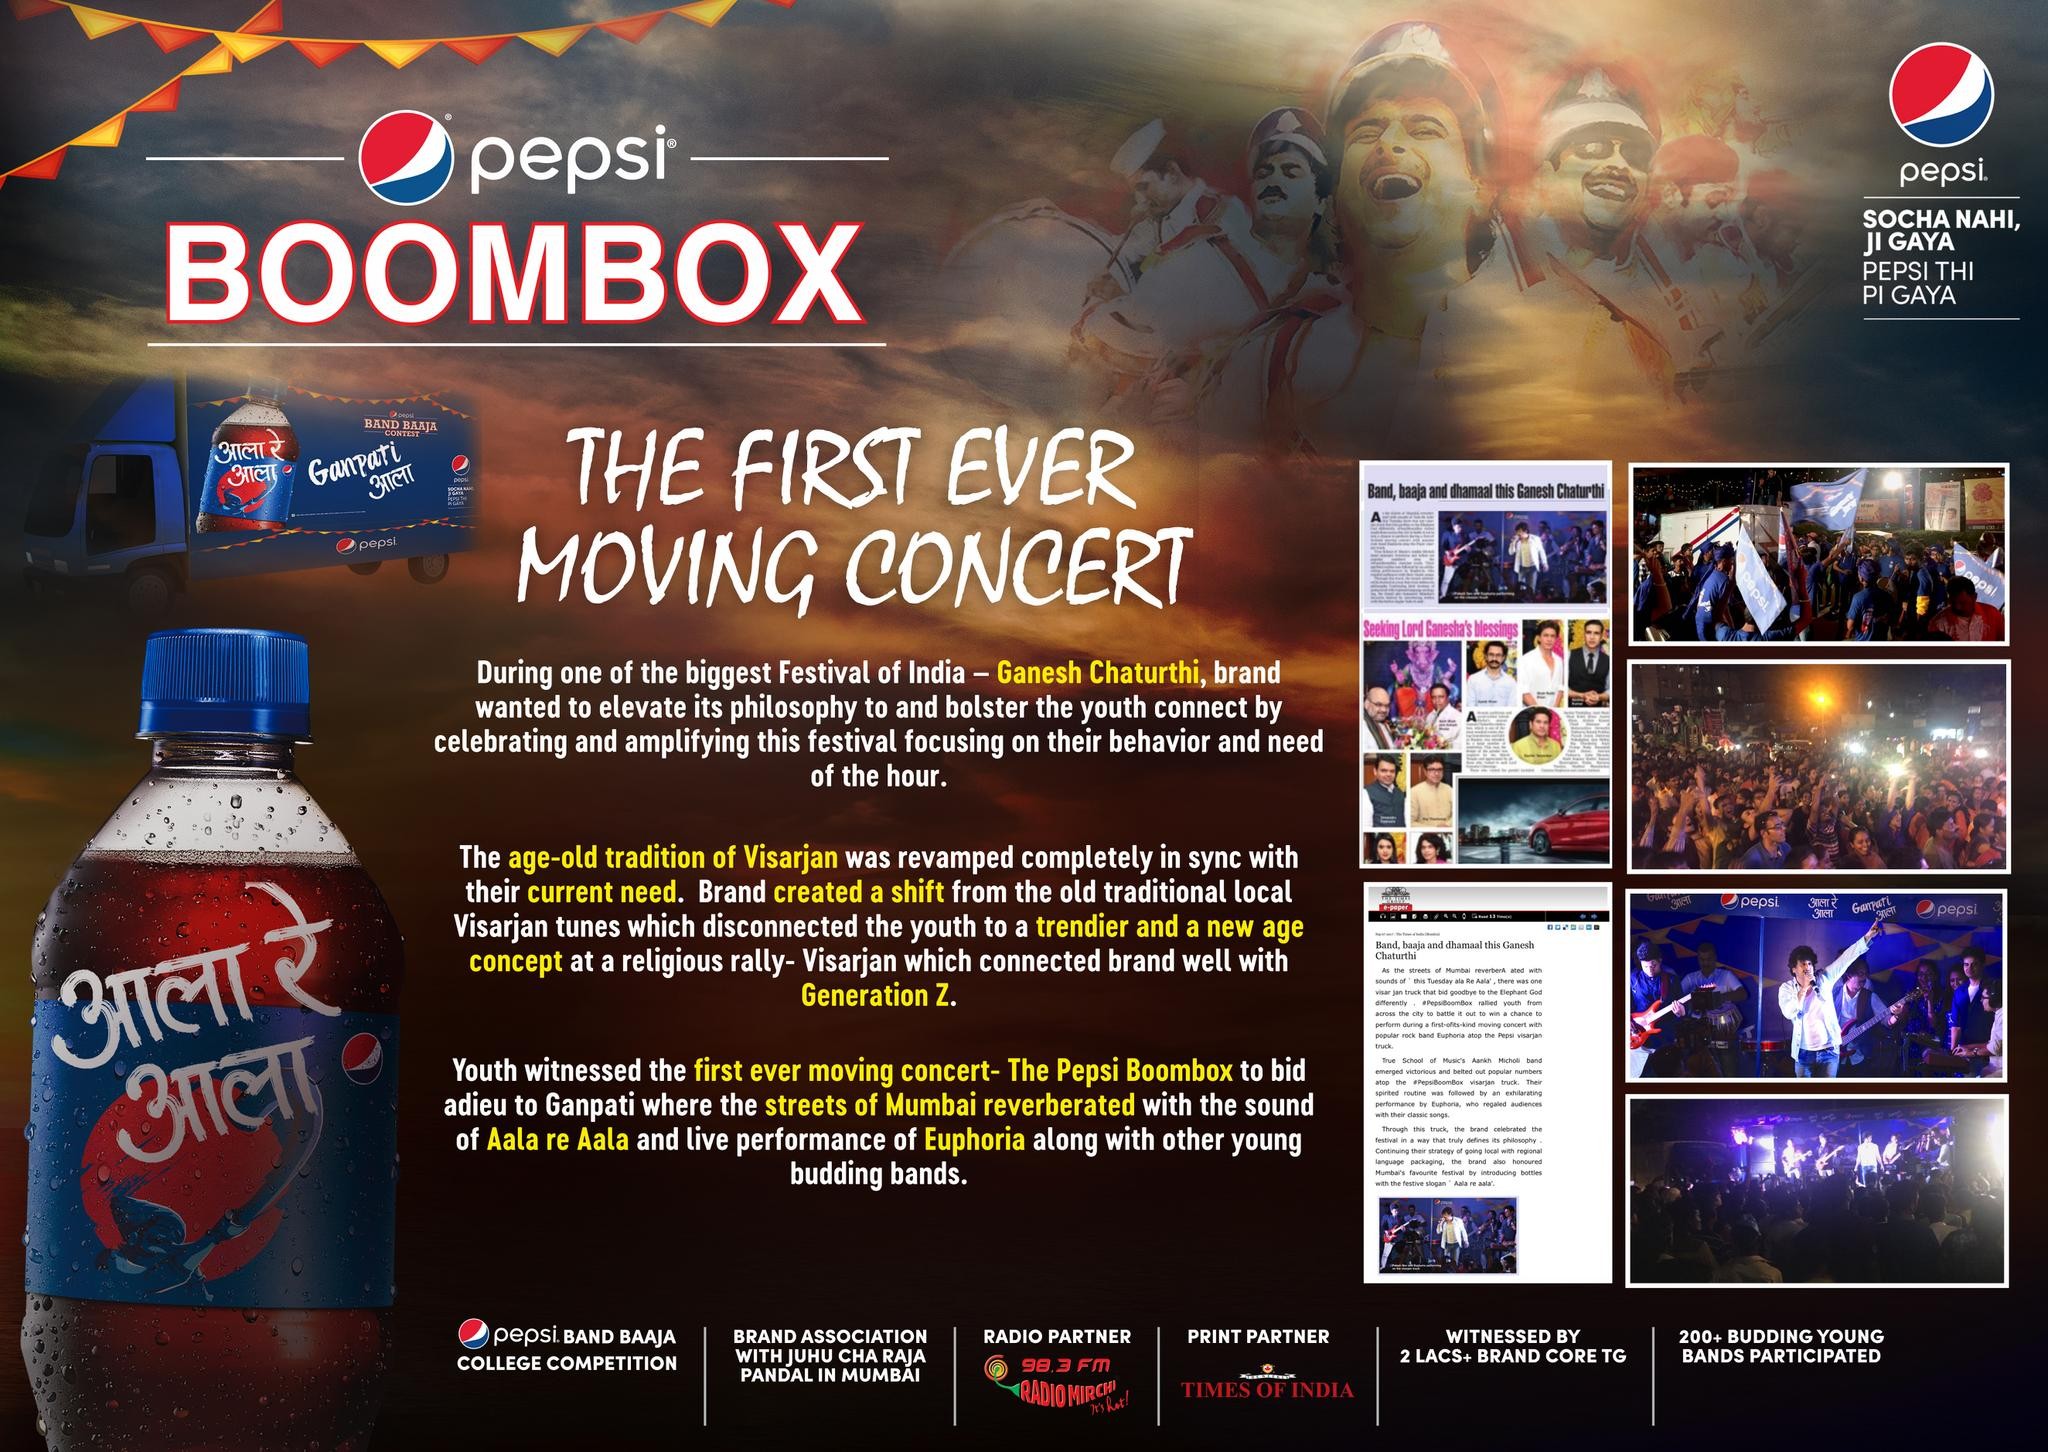 PEPSI BOOMBOX - THE FIRST EVER MOVING CONCERT